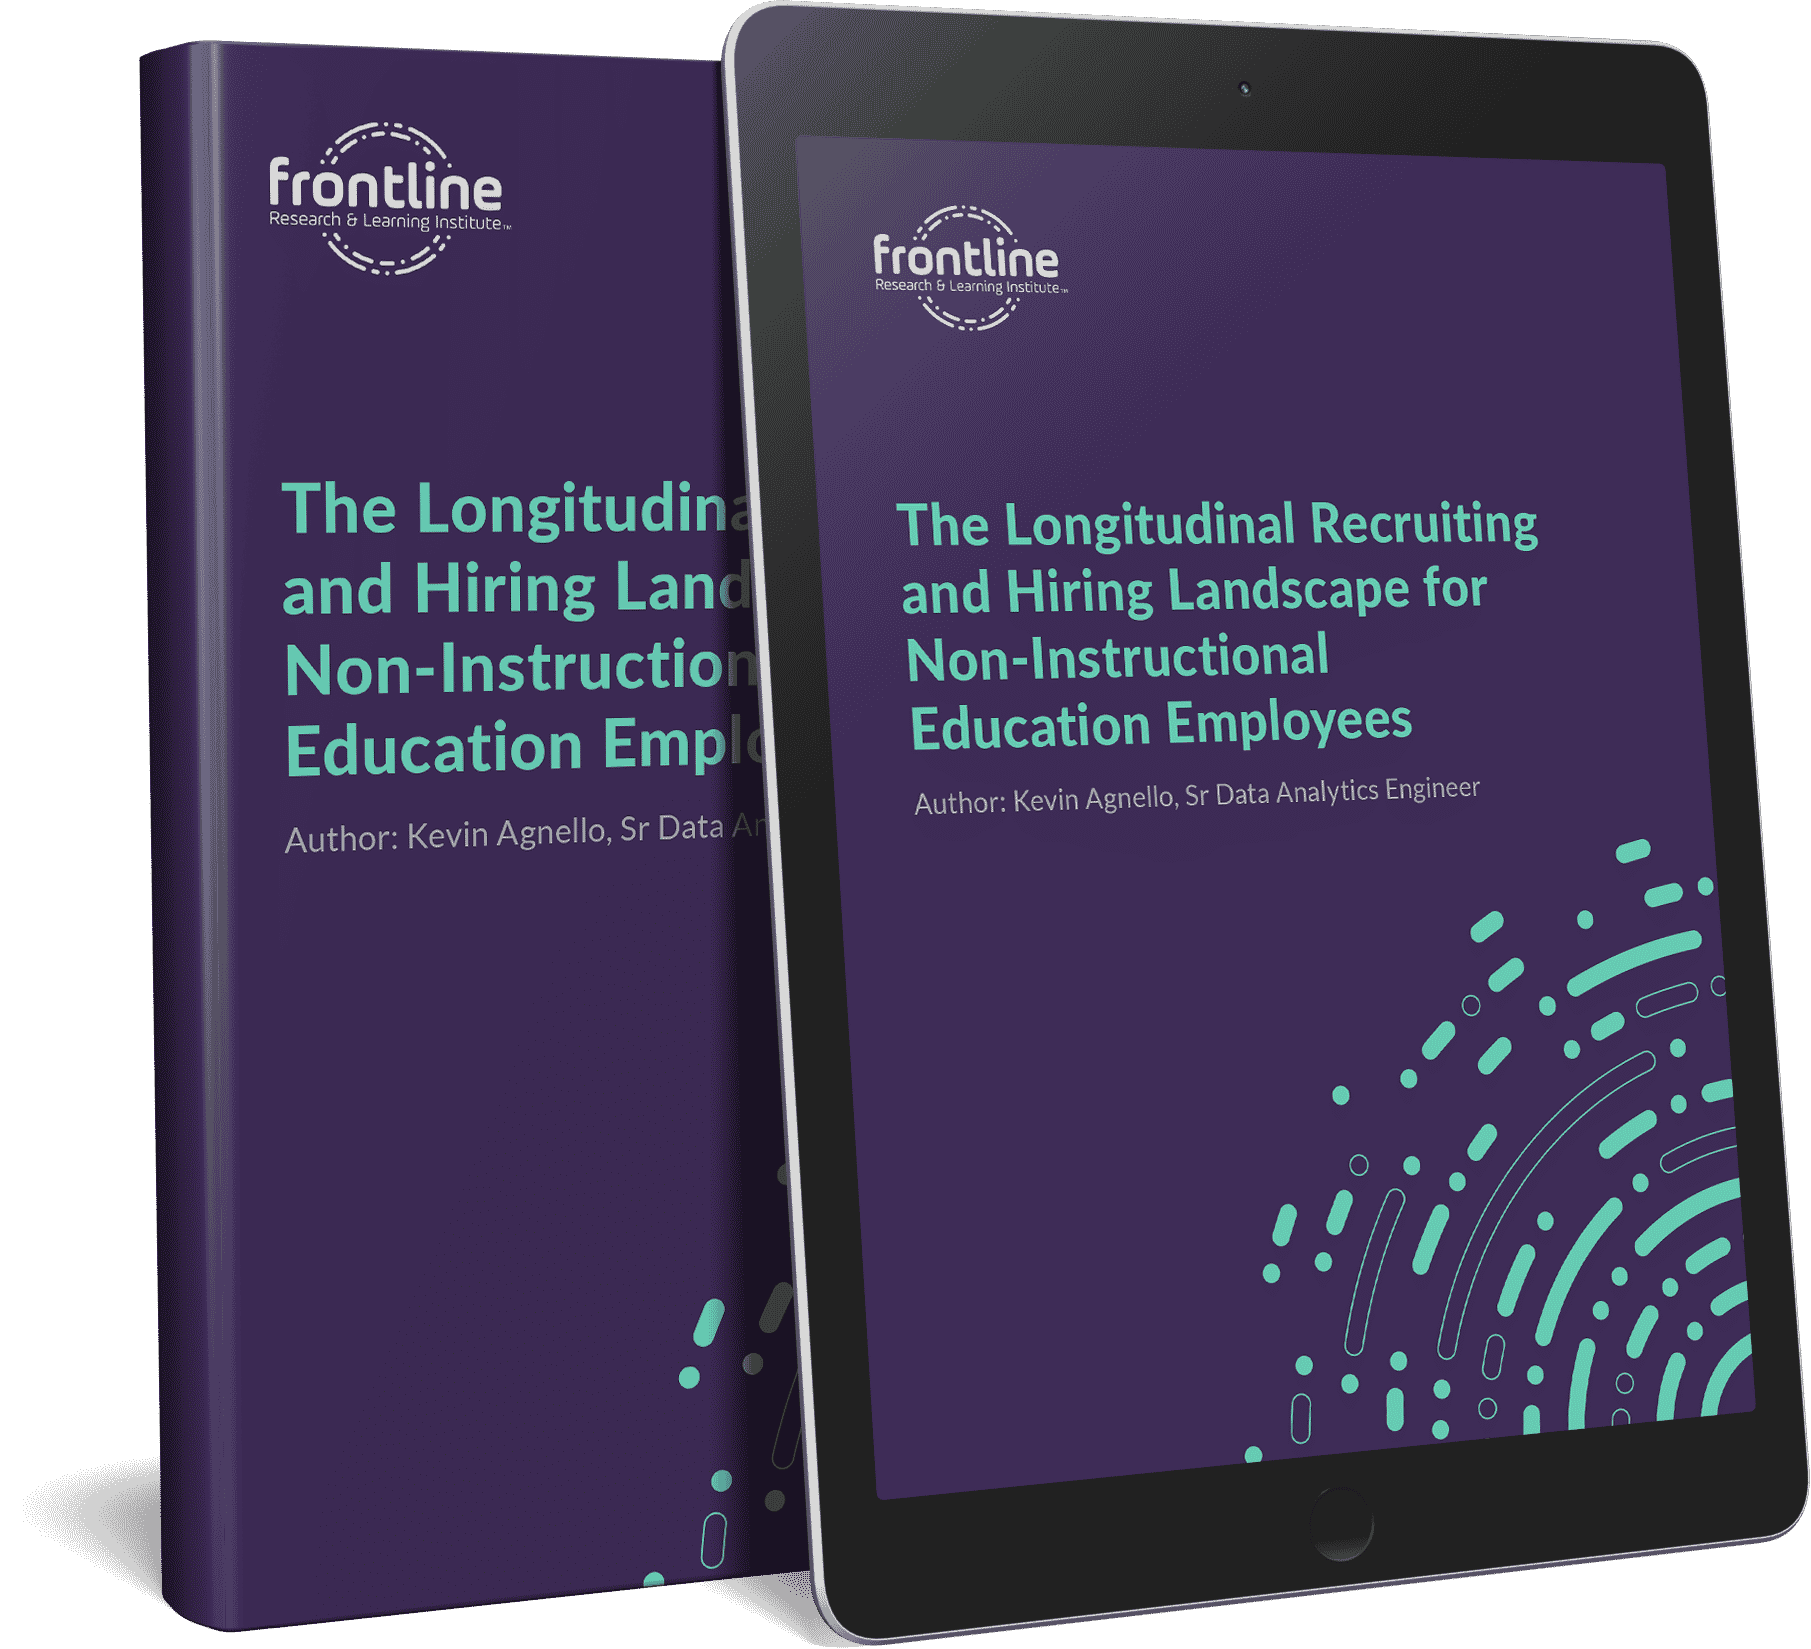 The Longitudinal Recruiting and Hiring Landscape for Non-Instructional Education Employees